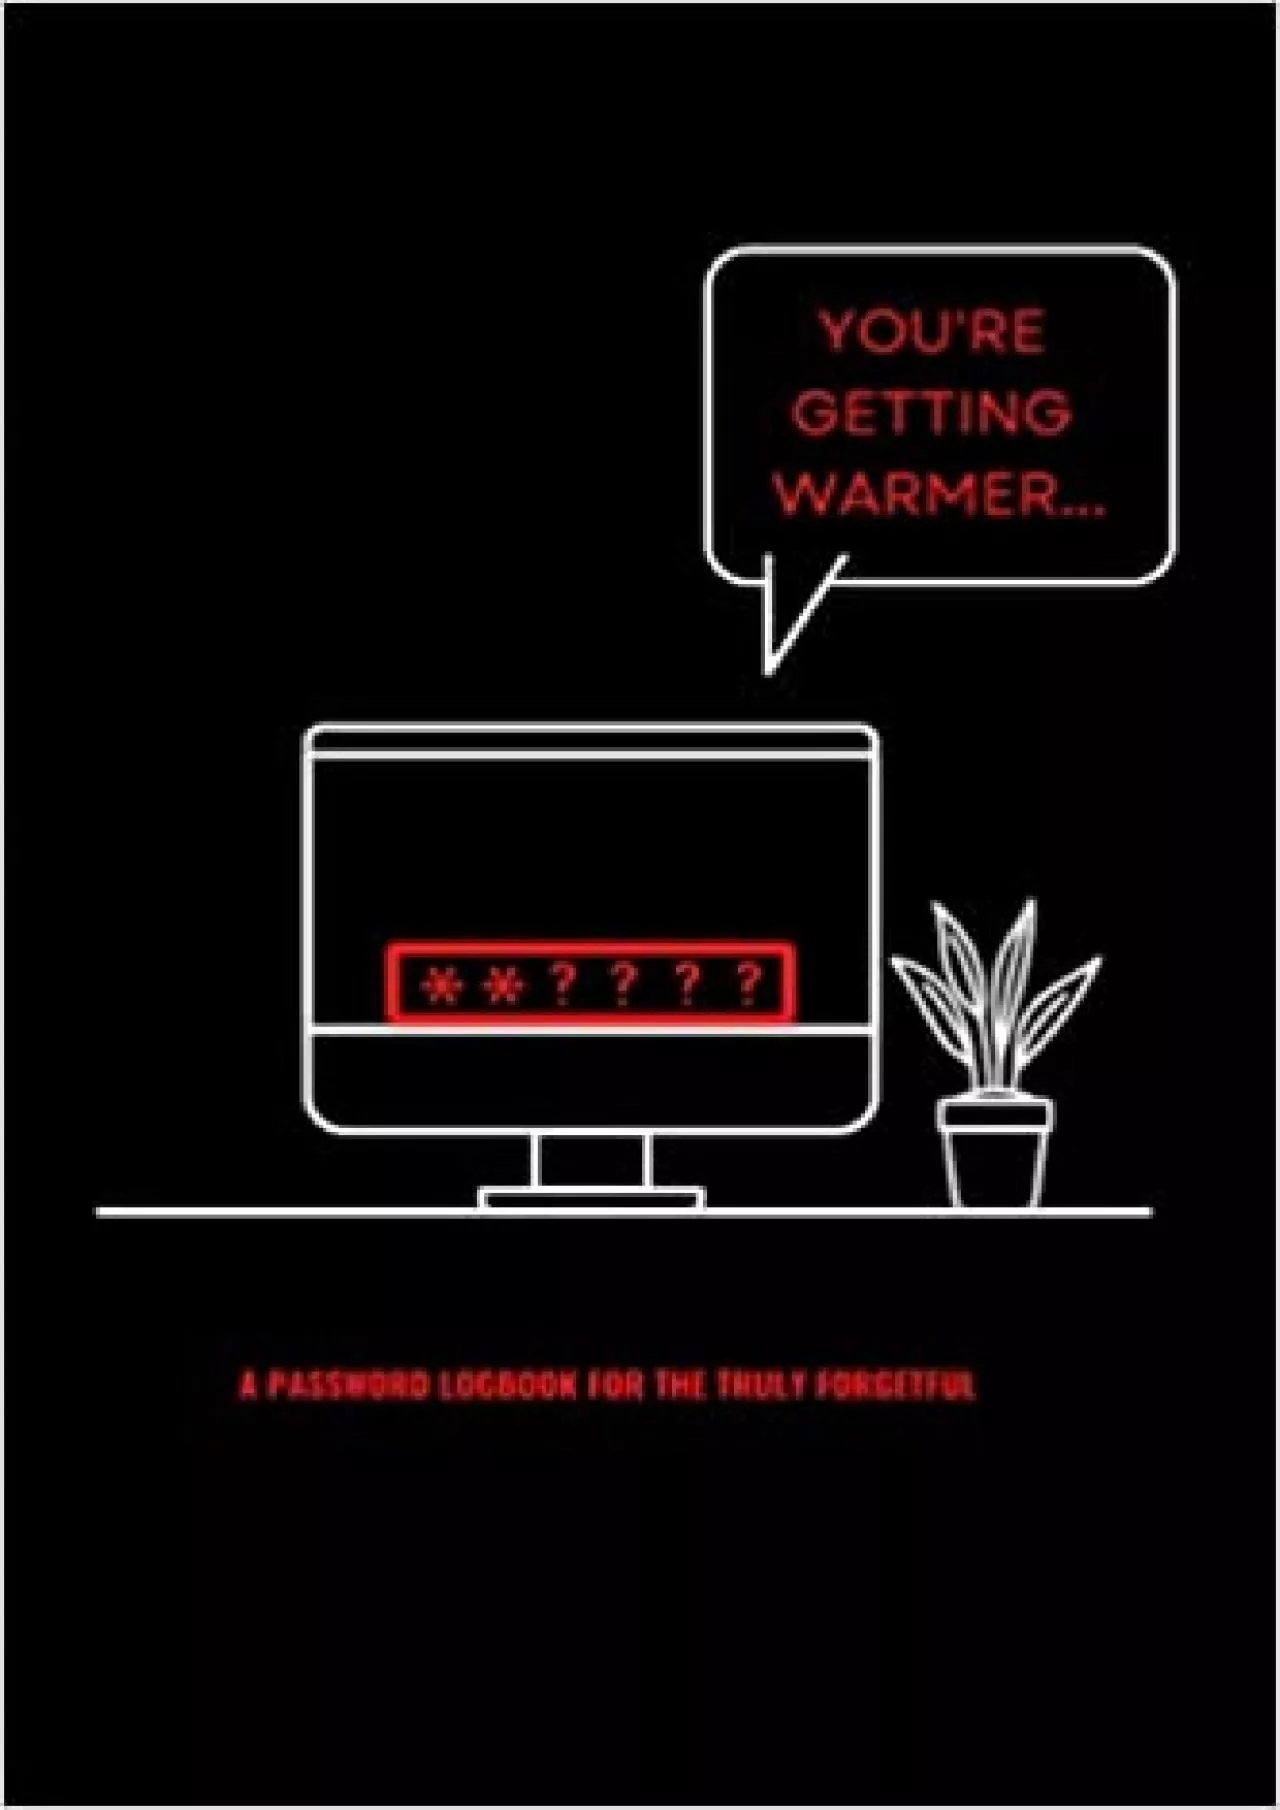 (BOOK)-YOU’RE GETTING WARMER…A PASSWORD LOGBOOK FOR THE TRULY FORGETFUL 6x9 Website/Internet